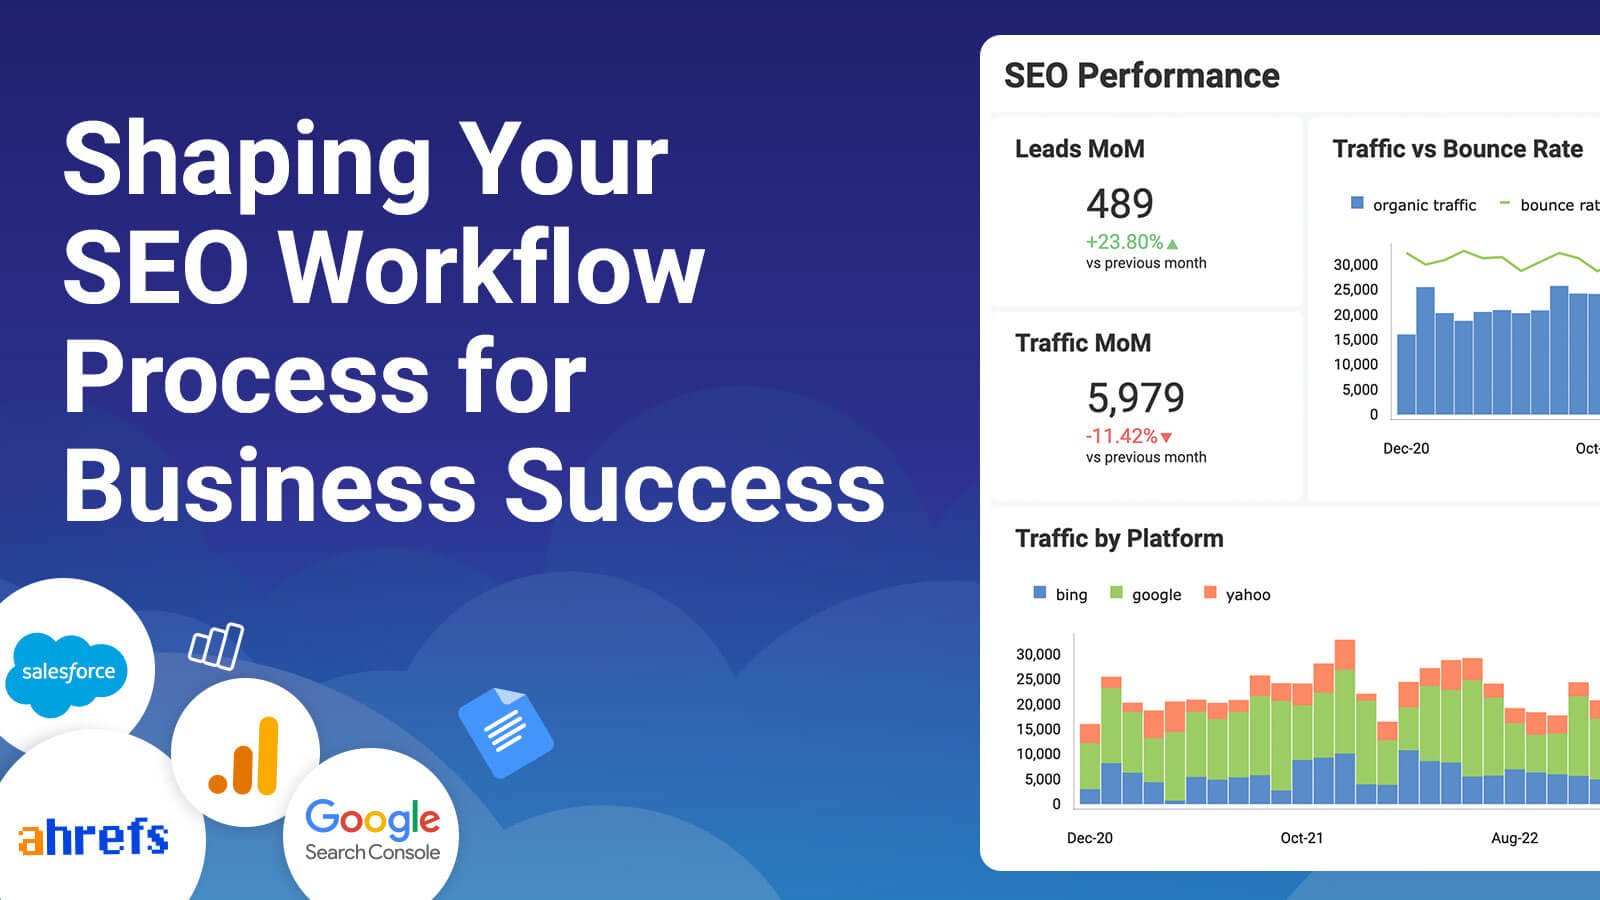 Shaping Your SEO Workflow Process for Business Success